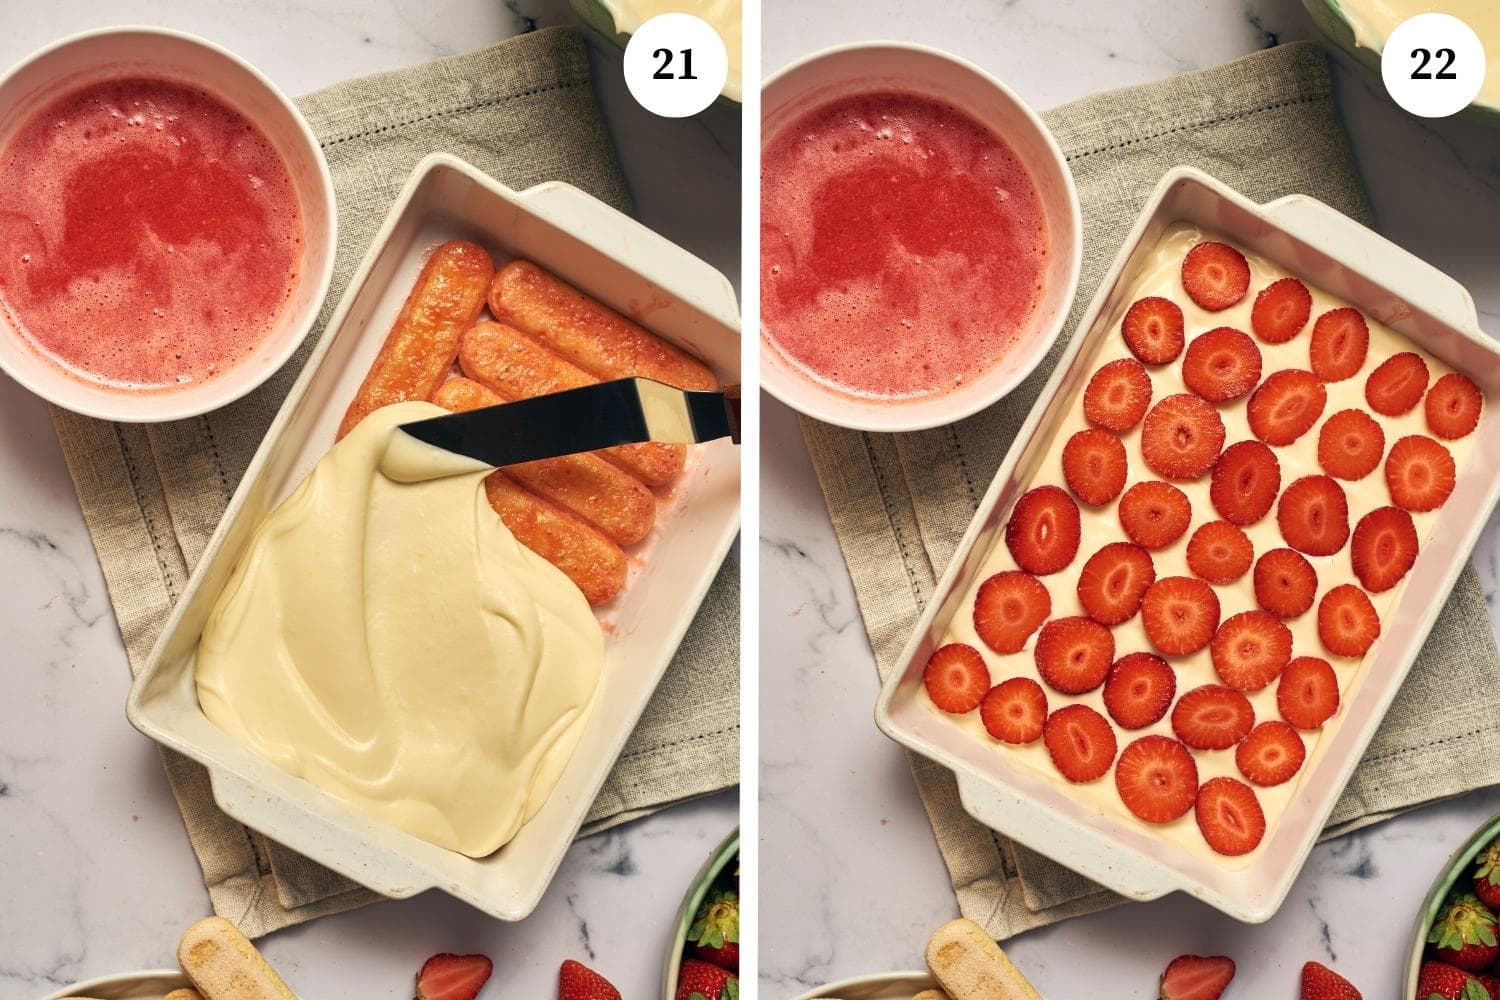 Process for assembling the strawberry tiramisu: spread the mascarpone cream mixture and spread it on top of the lady fingers. Place the cut strawberries on top